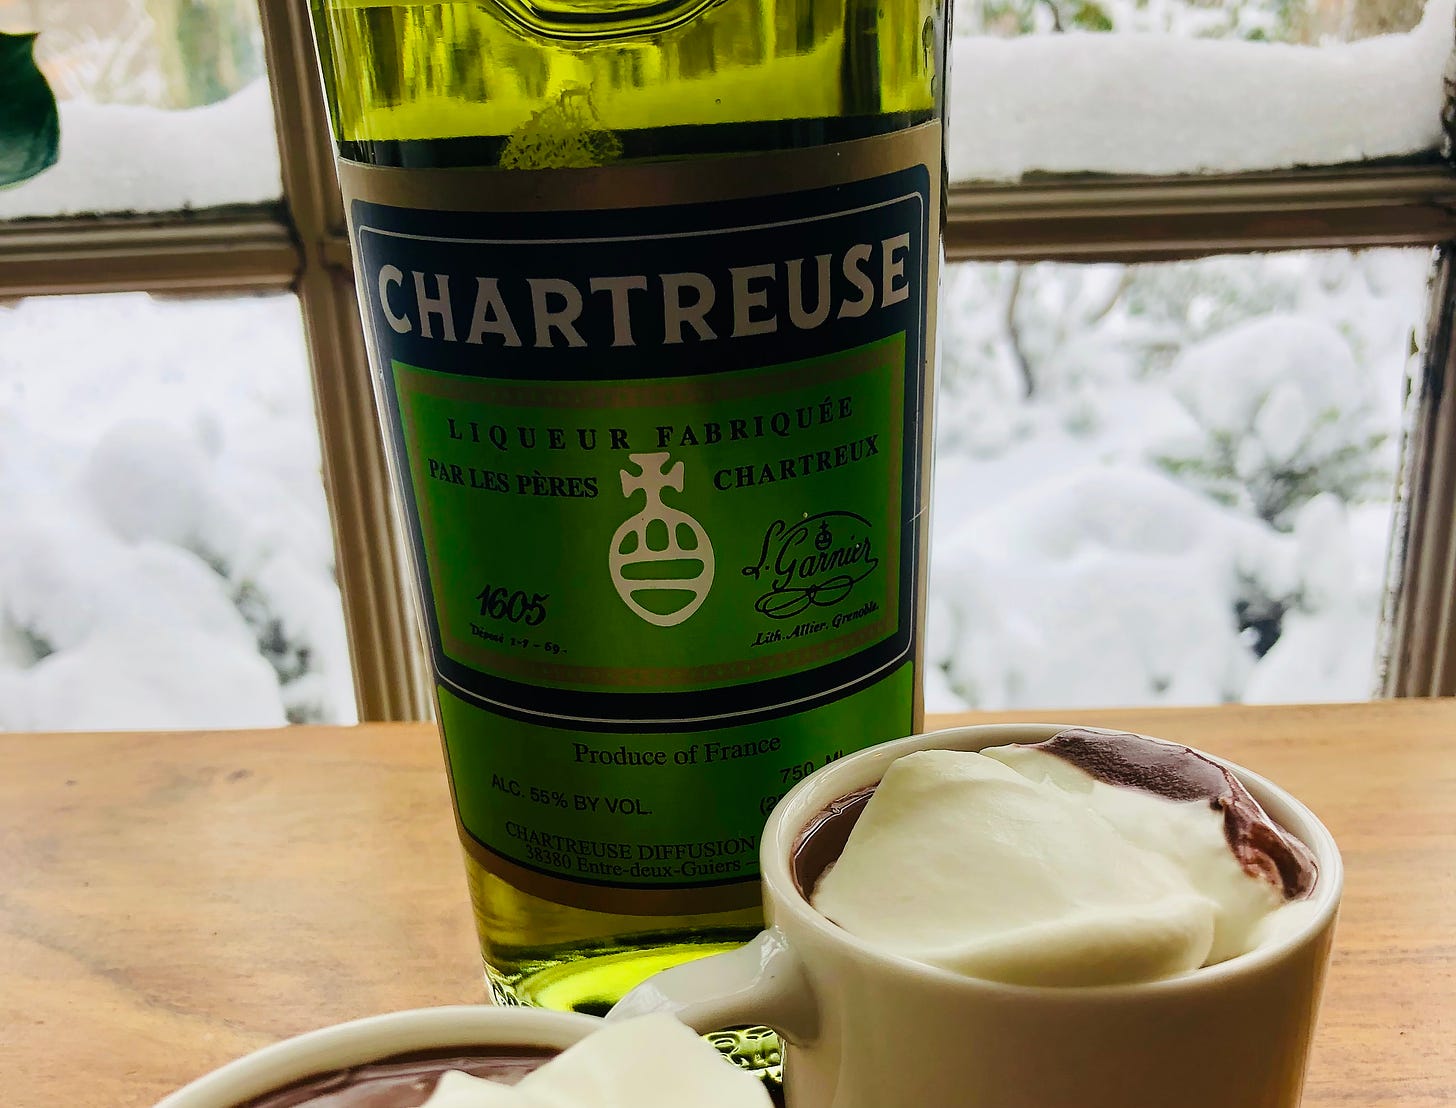 Chartreuse: The liqueur made by monks and why it's facing a global